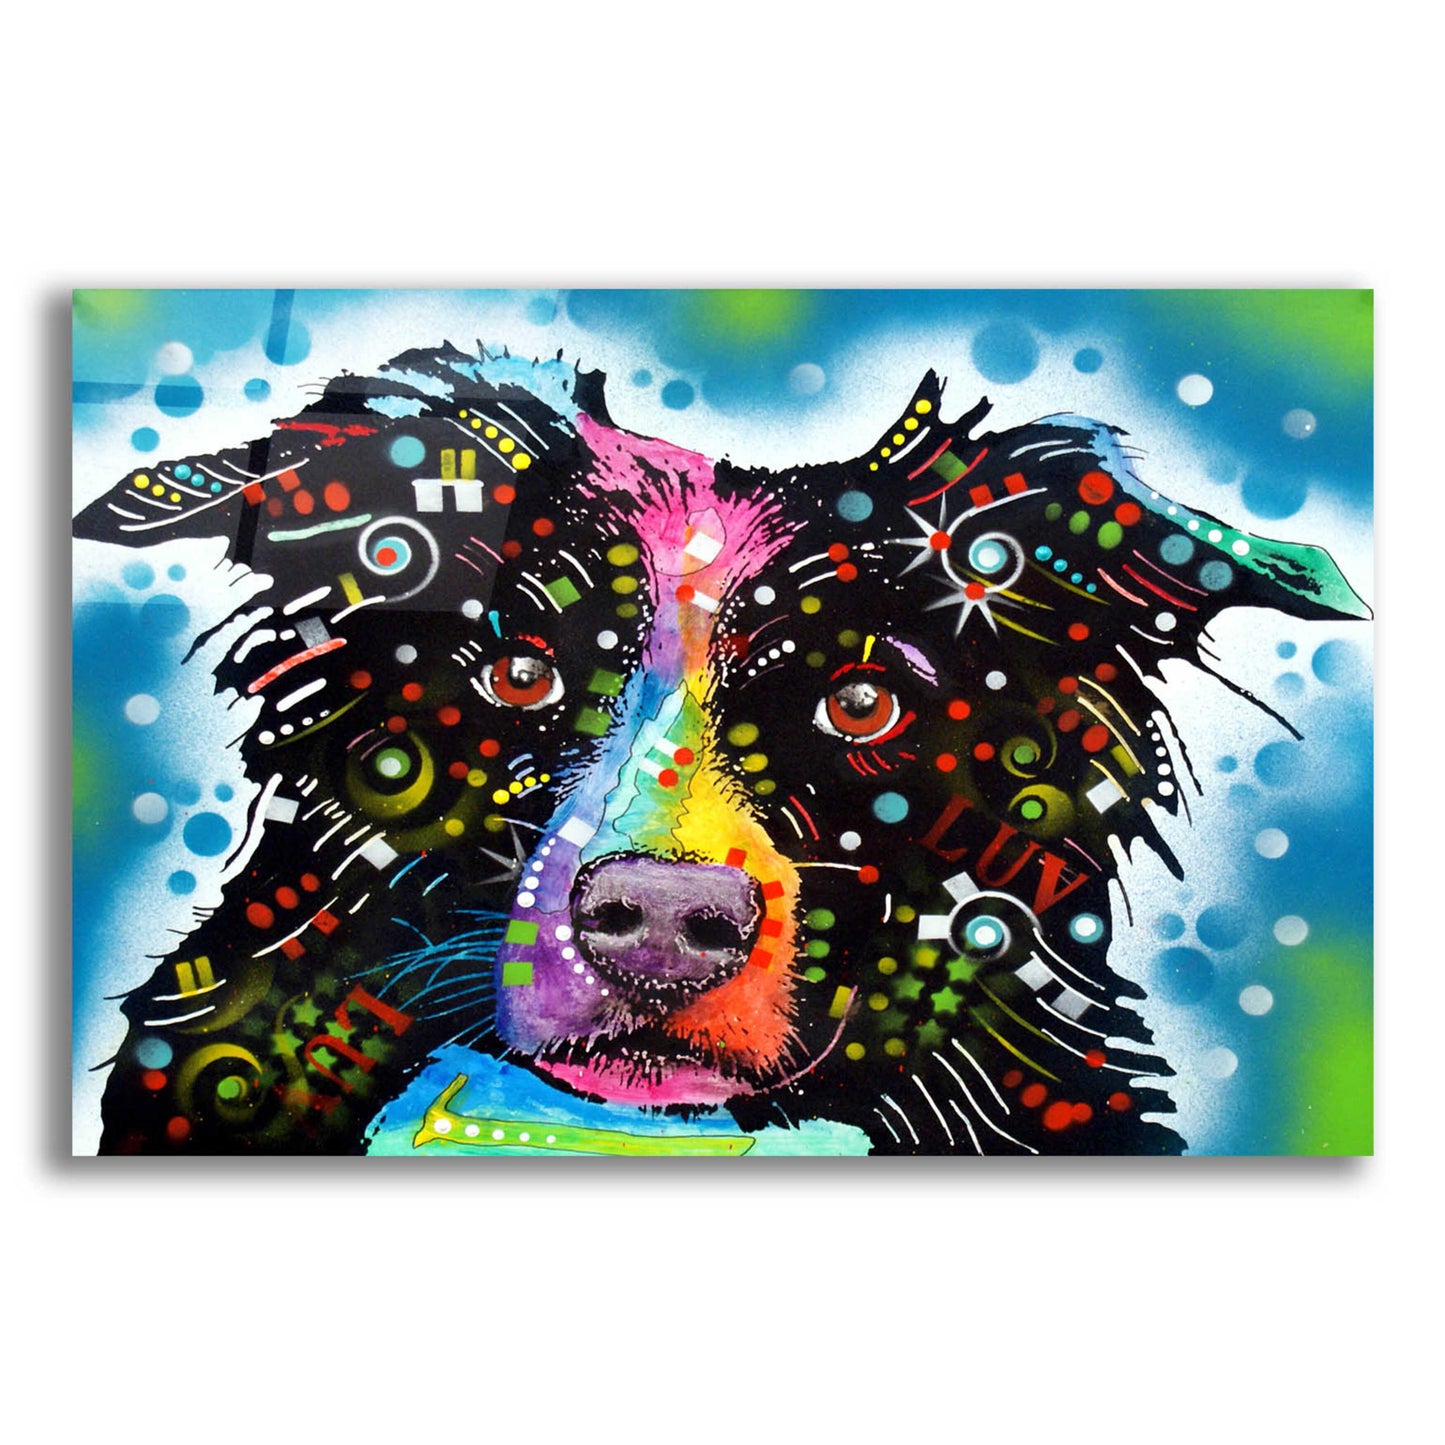 Epic Art 'Border Collie 3' by Dean Russo, Acrylic Glass Wall Art,24x16